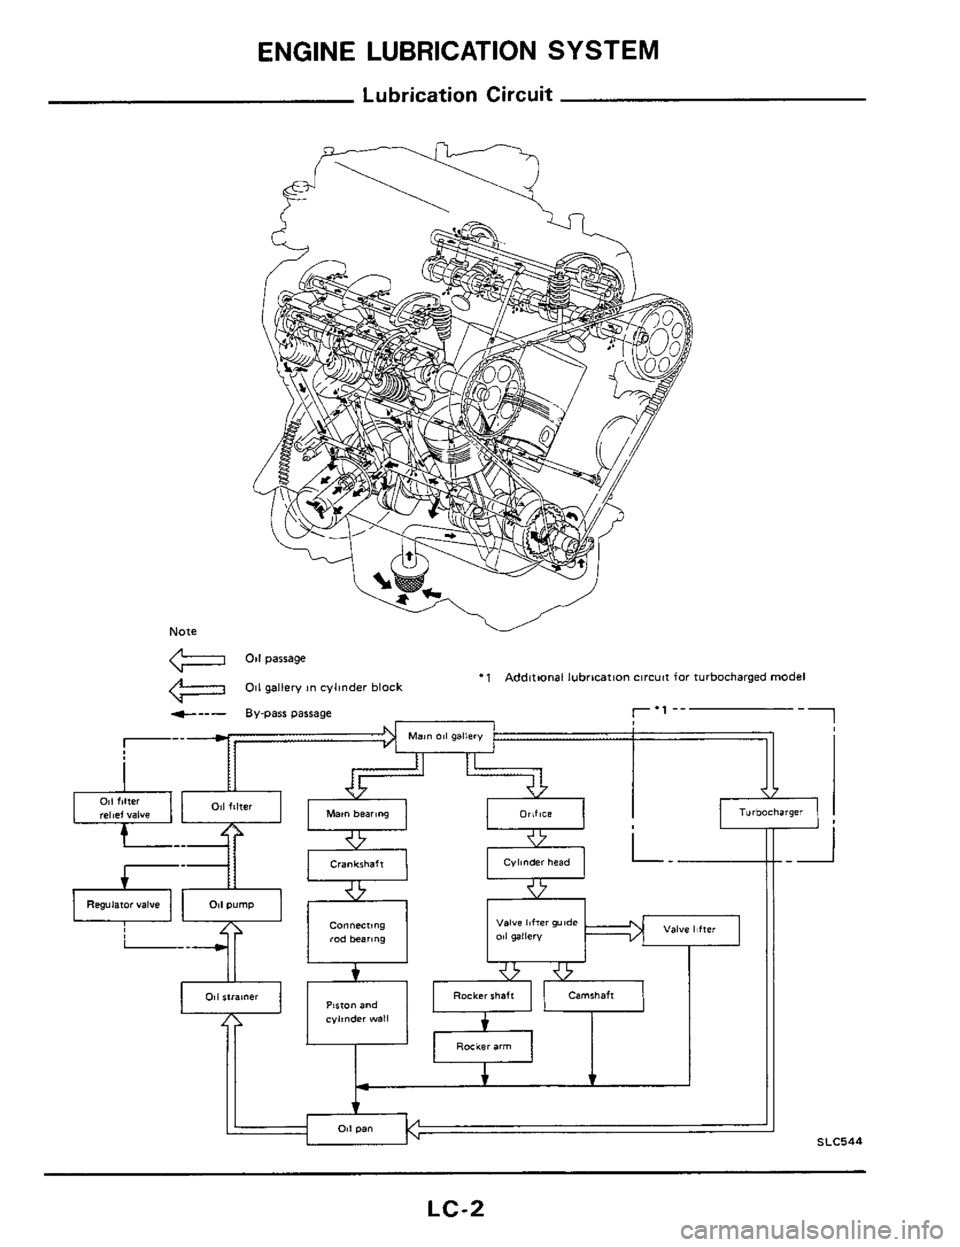 NISSAN 300ZX 1984 Z31 Engine Lubrication And Cooling System Workshop Manual ENGINE LUBRICATION  SYSTEM 
Lubrication Circuit 
Note 
m 011 parrage 
011 gallery in cylinder block 1 Additional lubrication circuit for turbocharged  model 
f--- By-parr  parrage 
Maan 011 gallery I